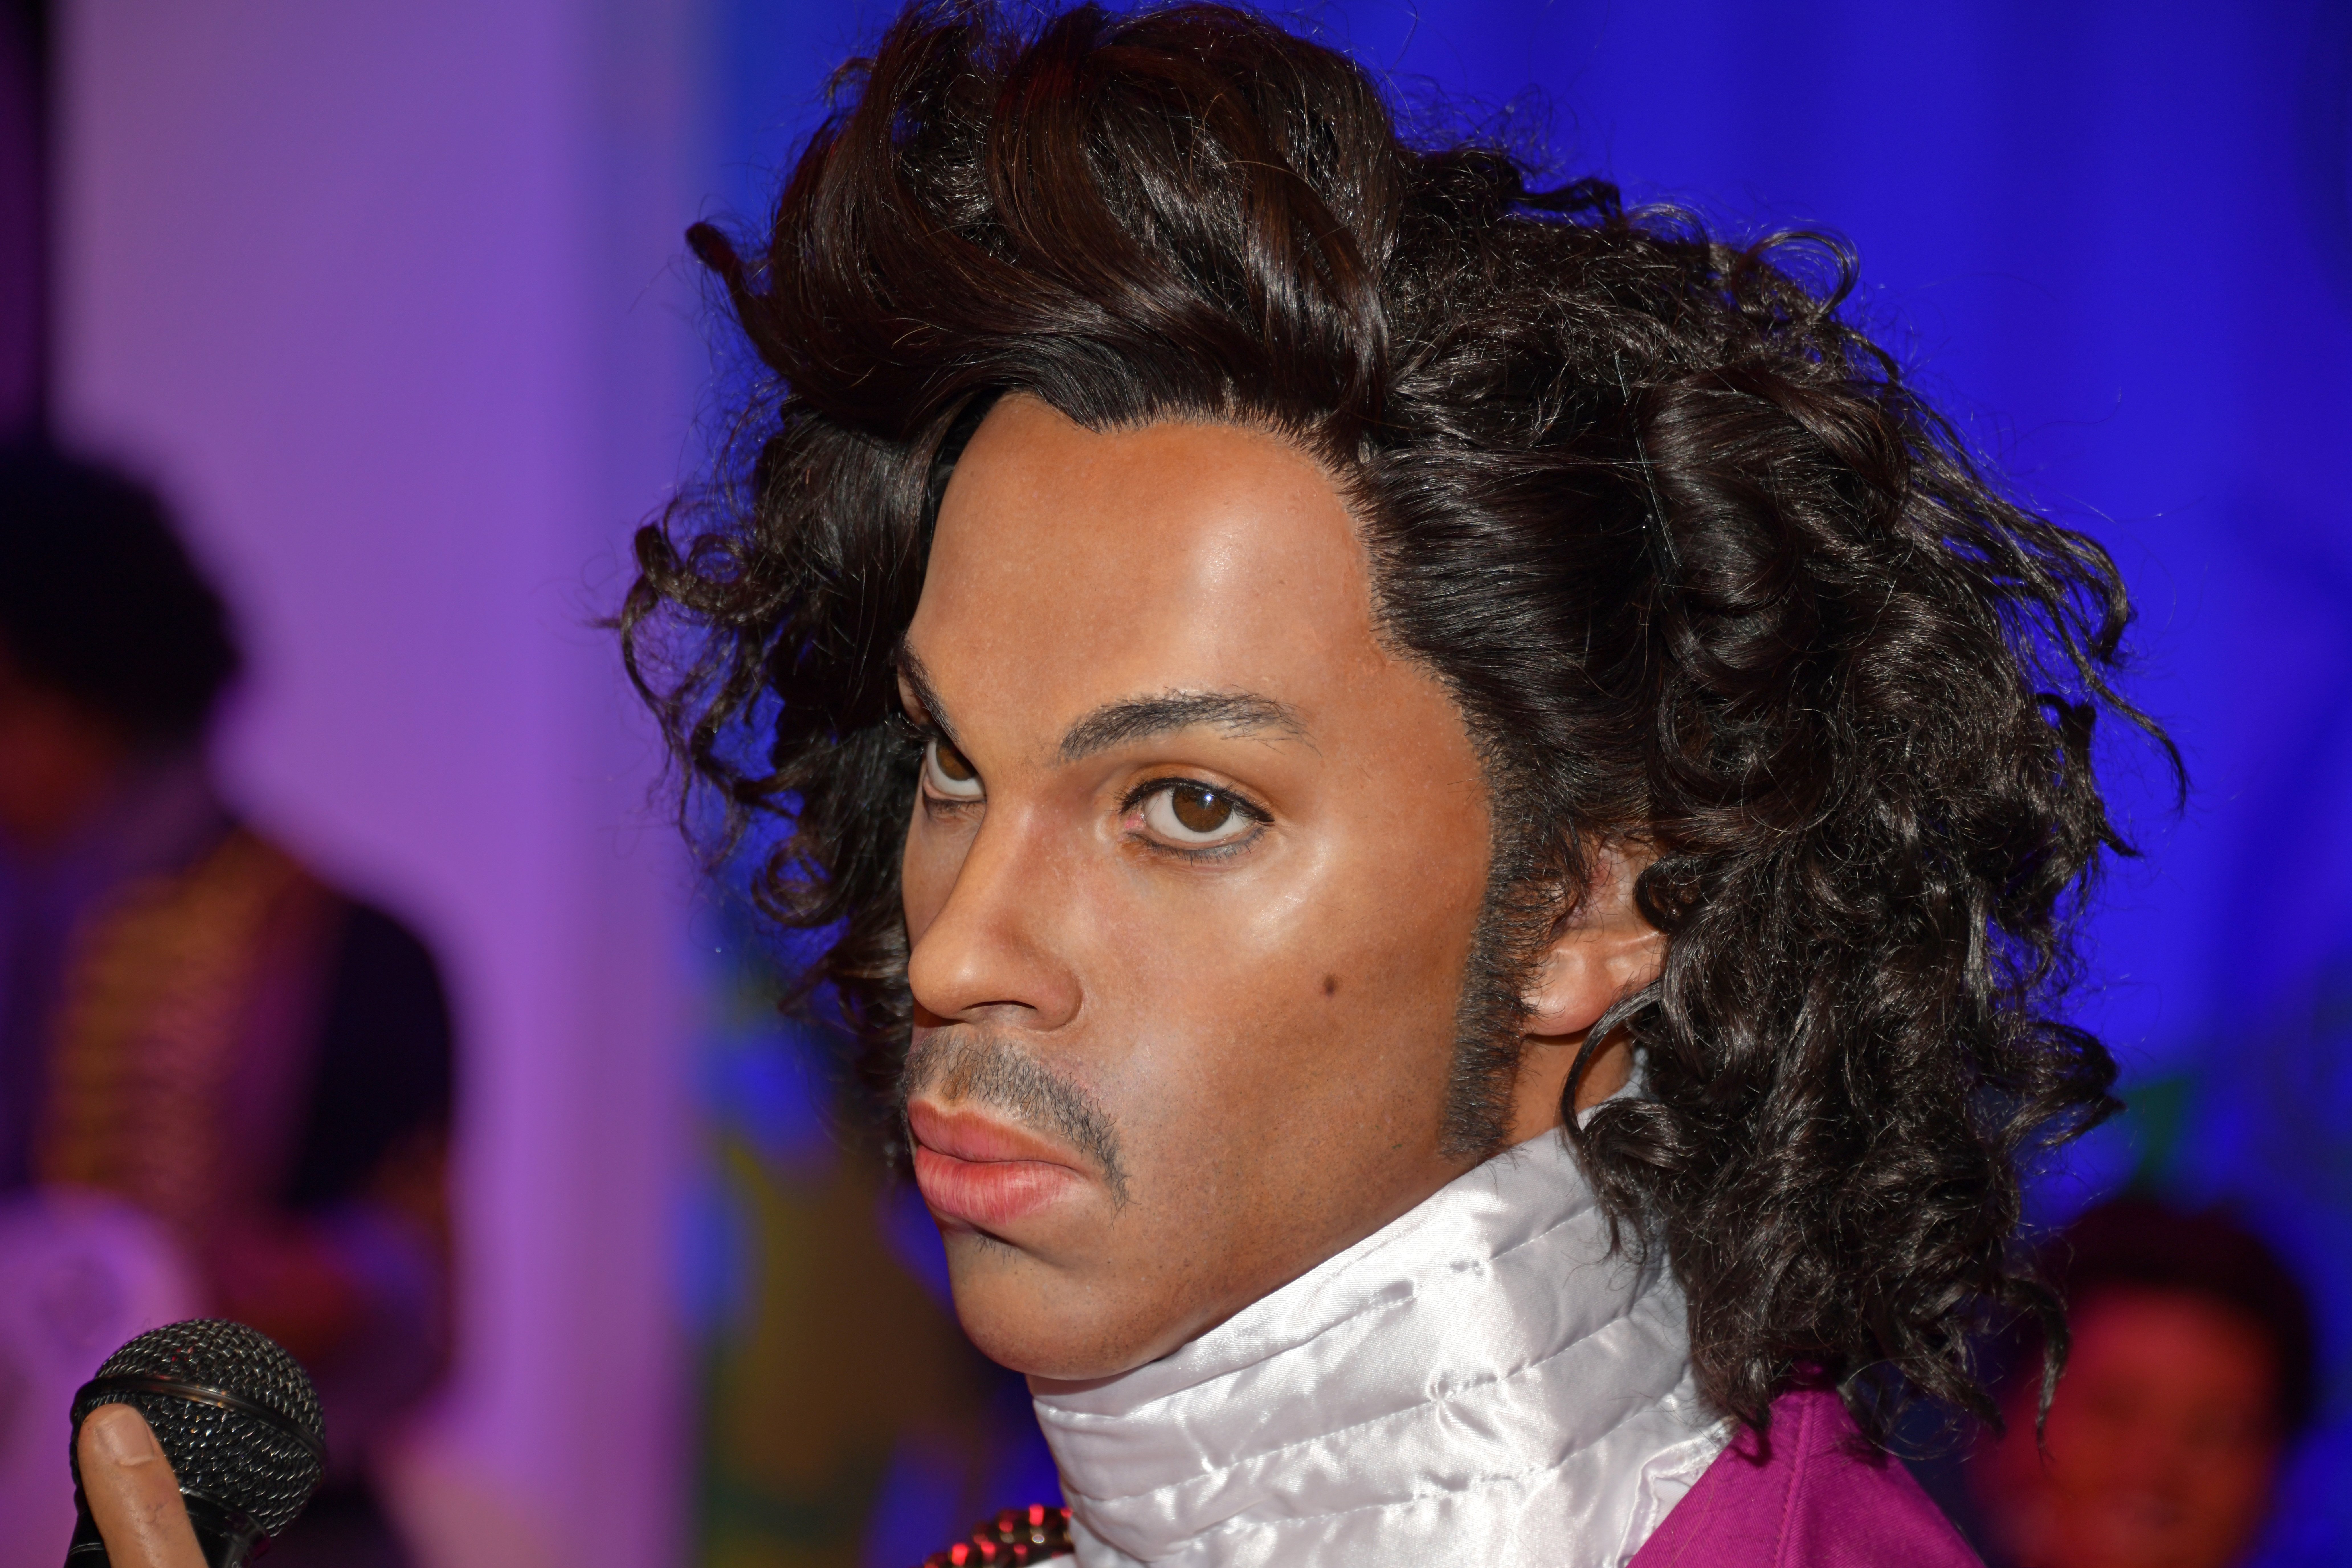 Prince Rogers Nelson at Madame Tussauds Las Vegas NV, USA 09-30-18 | Photo: Shutterstock